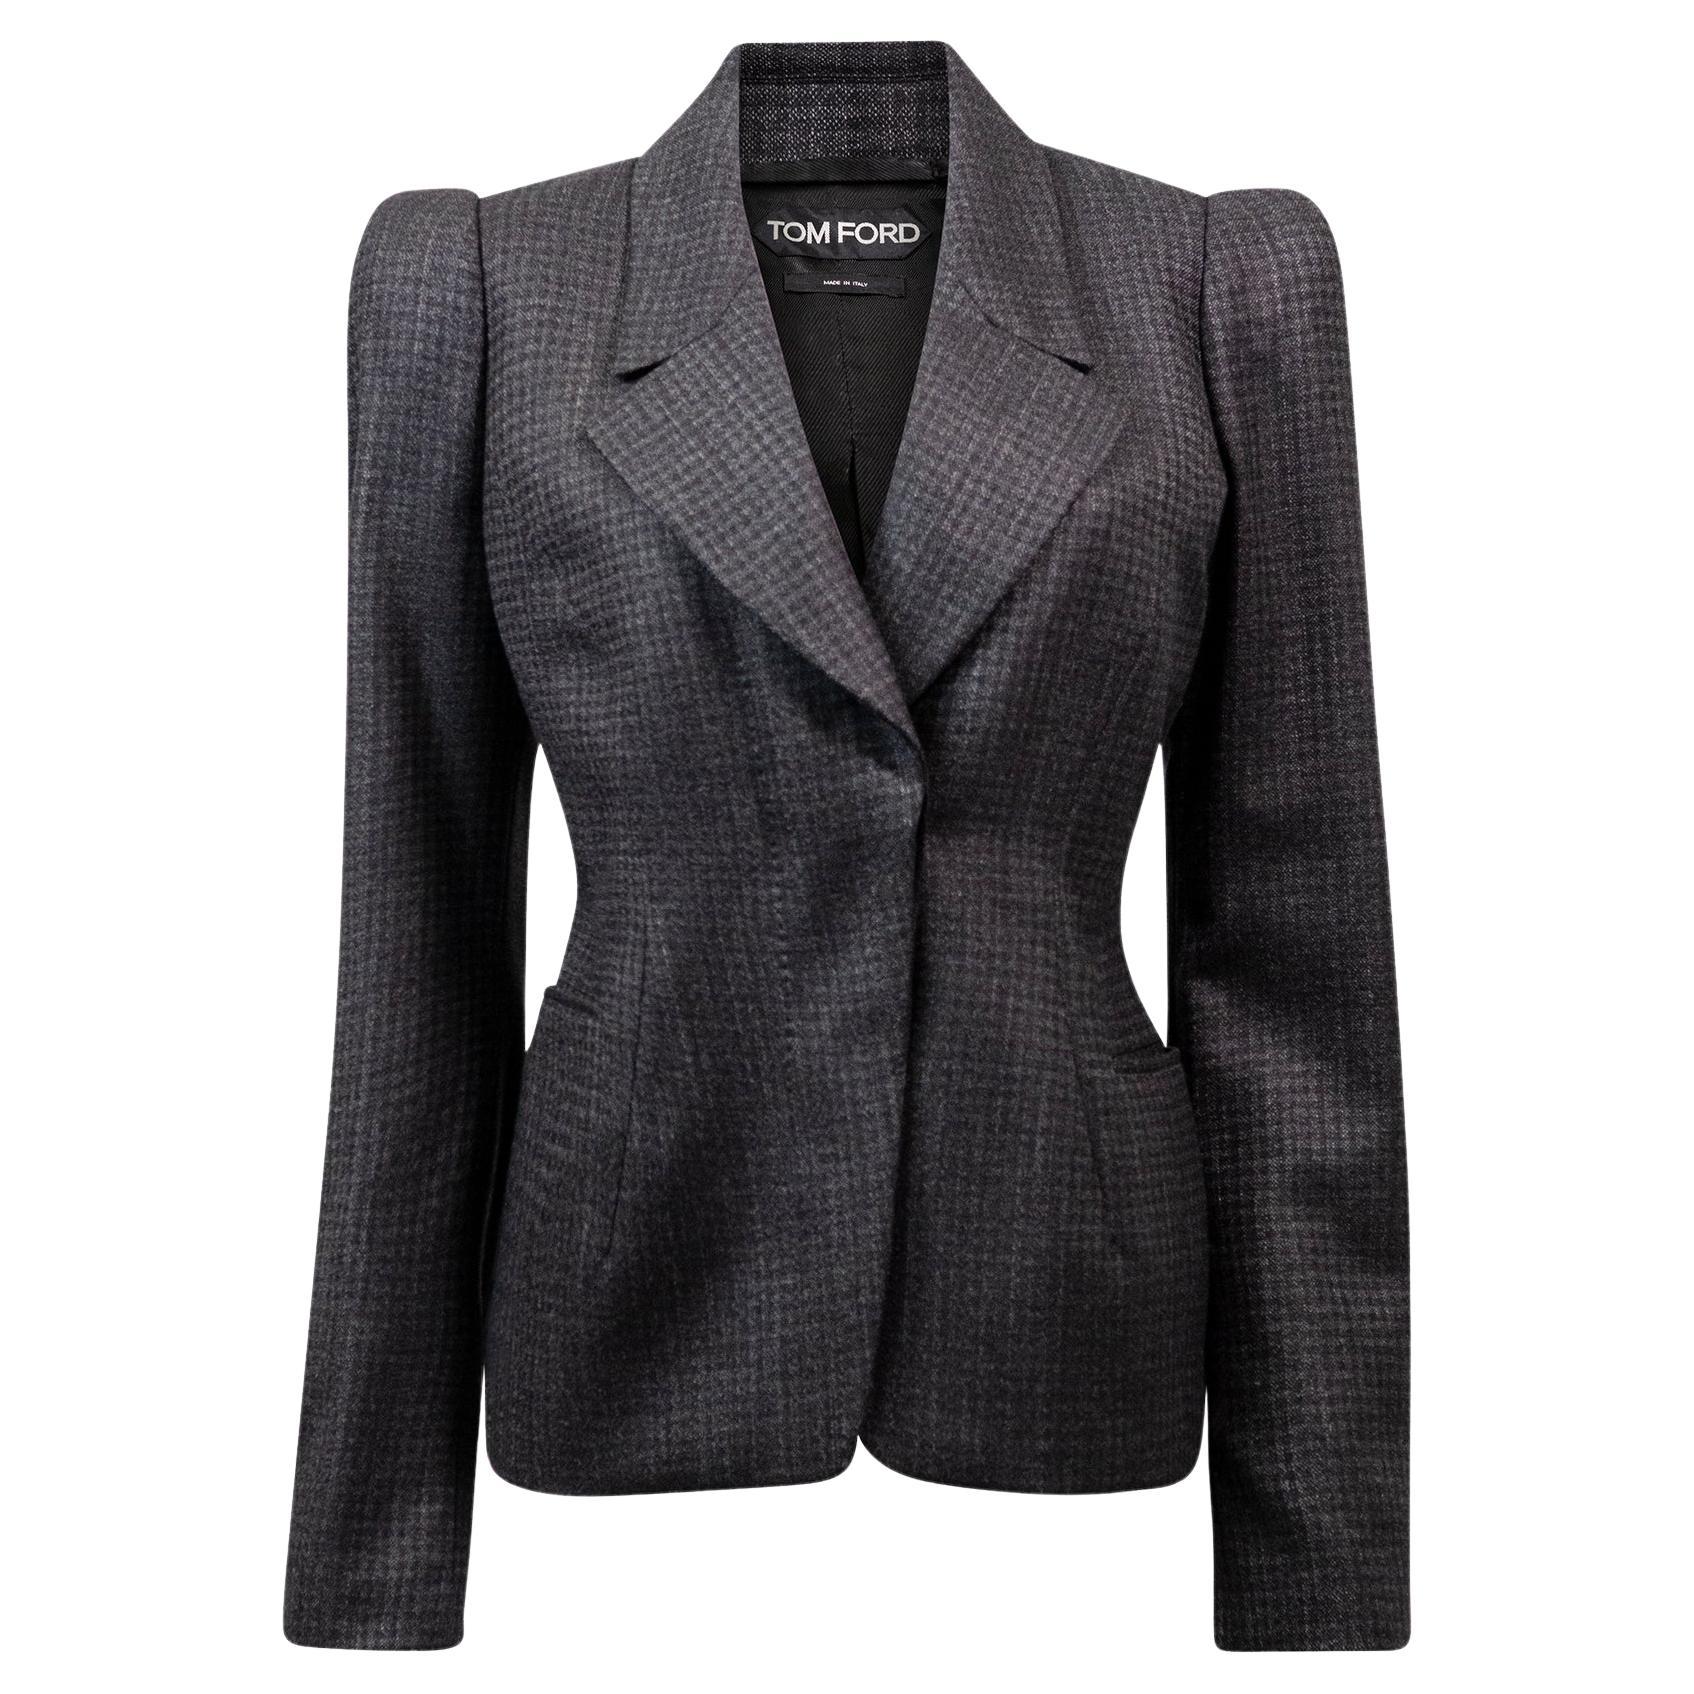 Tom Ford Elegant Classic Tailored Blazer With Large Statement Shoulders